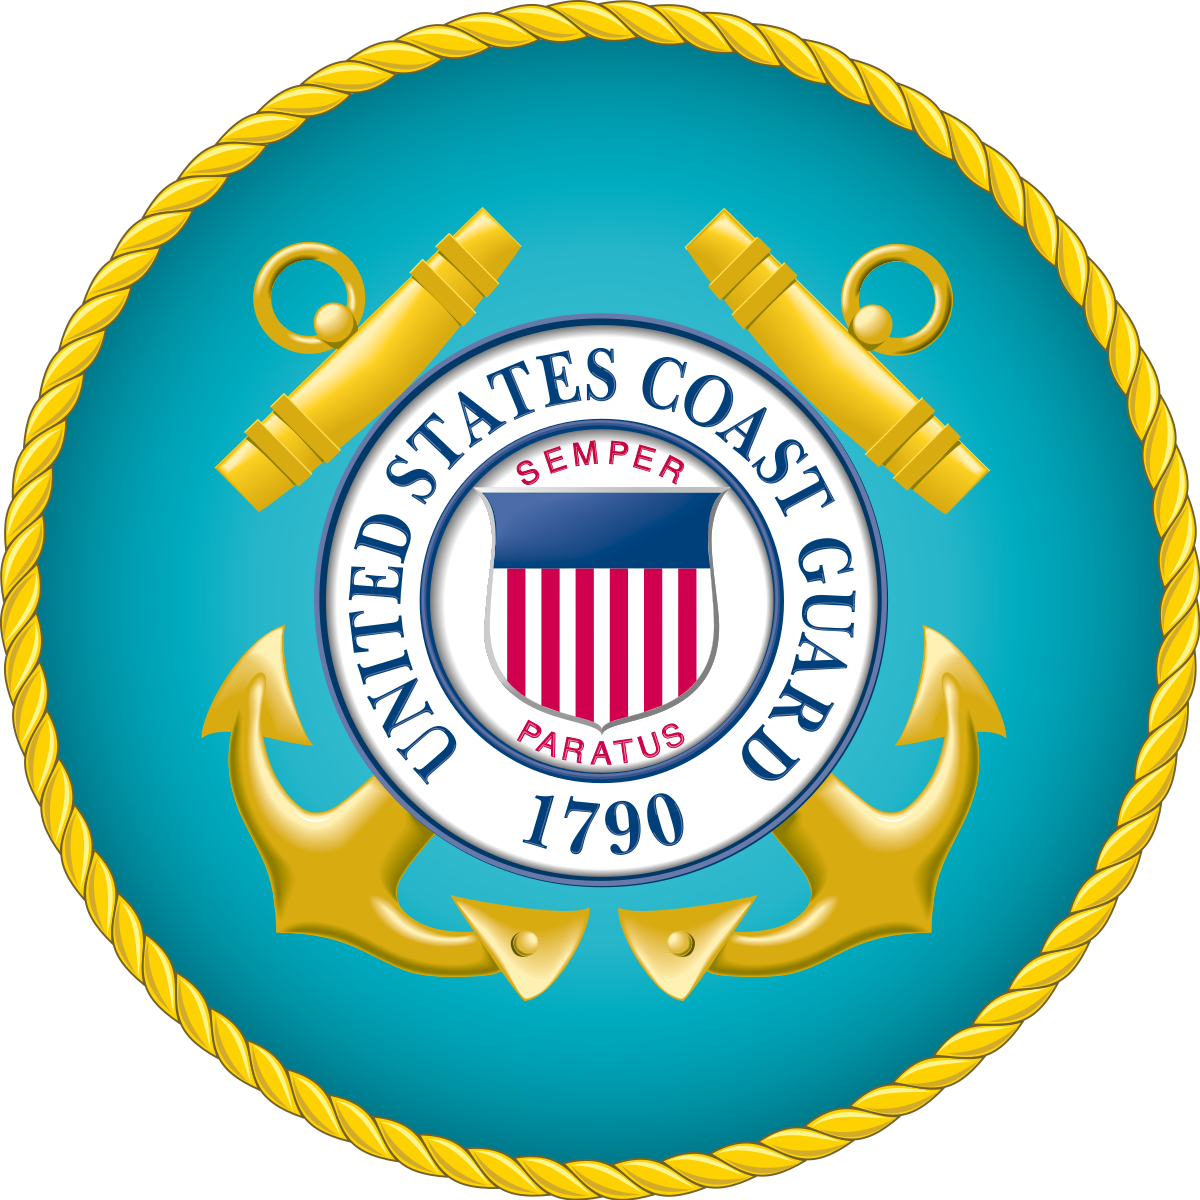 US COAST GUARD Patches!